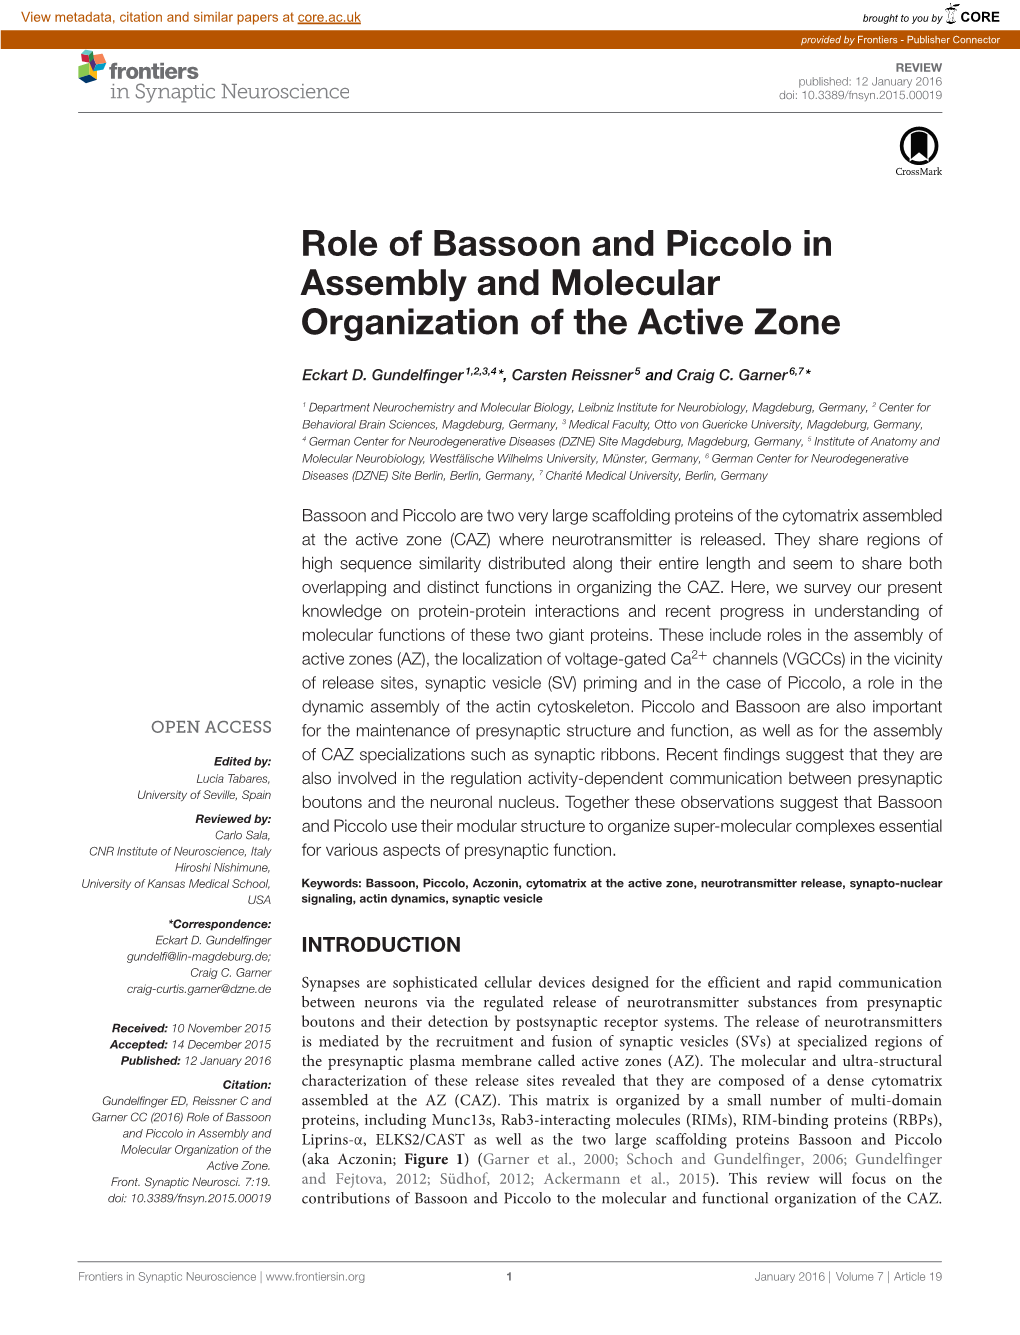 Role of Bassoon and Piccolo in Assembly and Molecular Organization of the Active Zone